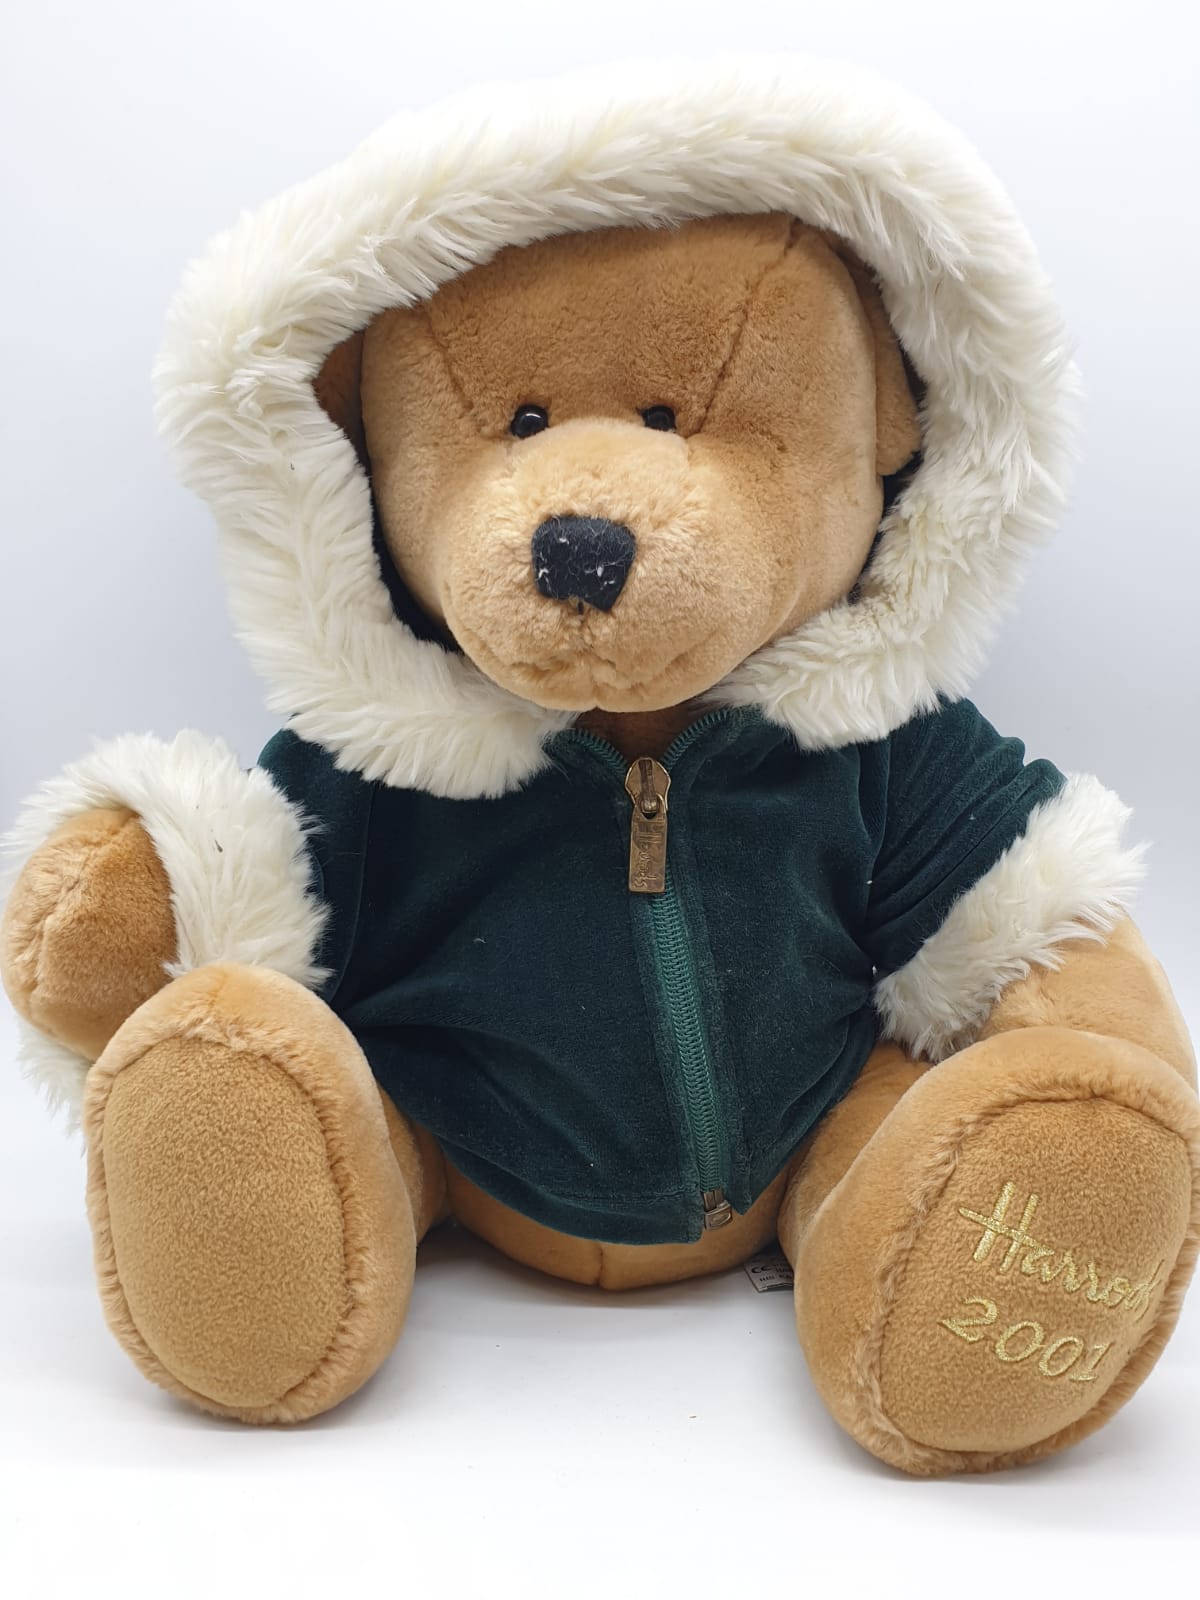 2 Harrods Teddy Bears 2001&2008 approx 40cms, very collectible - Image 3 of 21